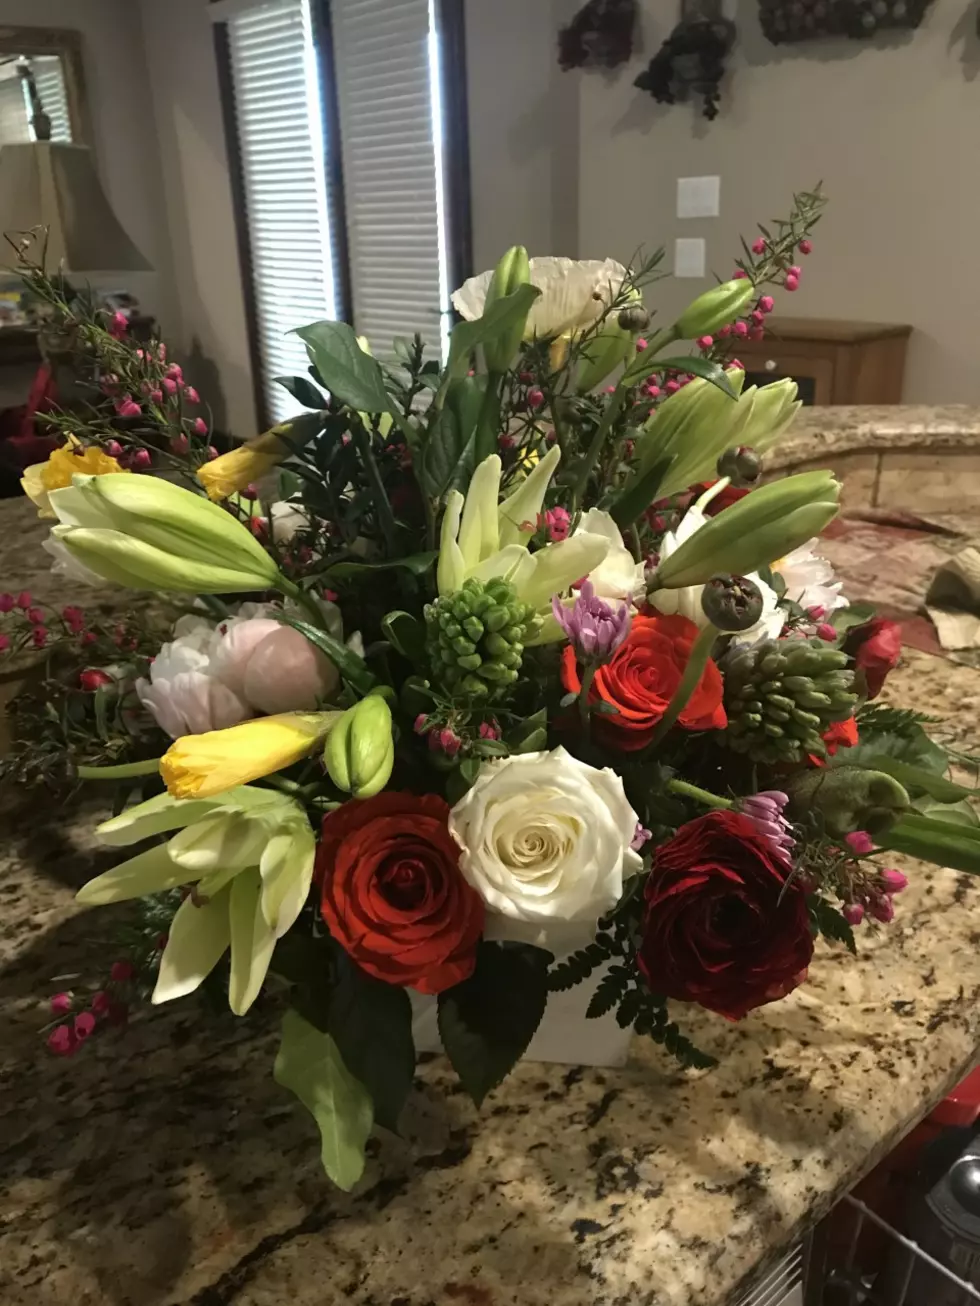 Awesome Local Gifts for Mom on Her Special Day